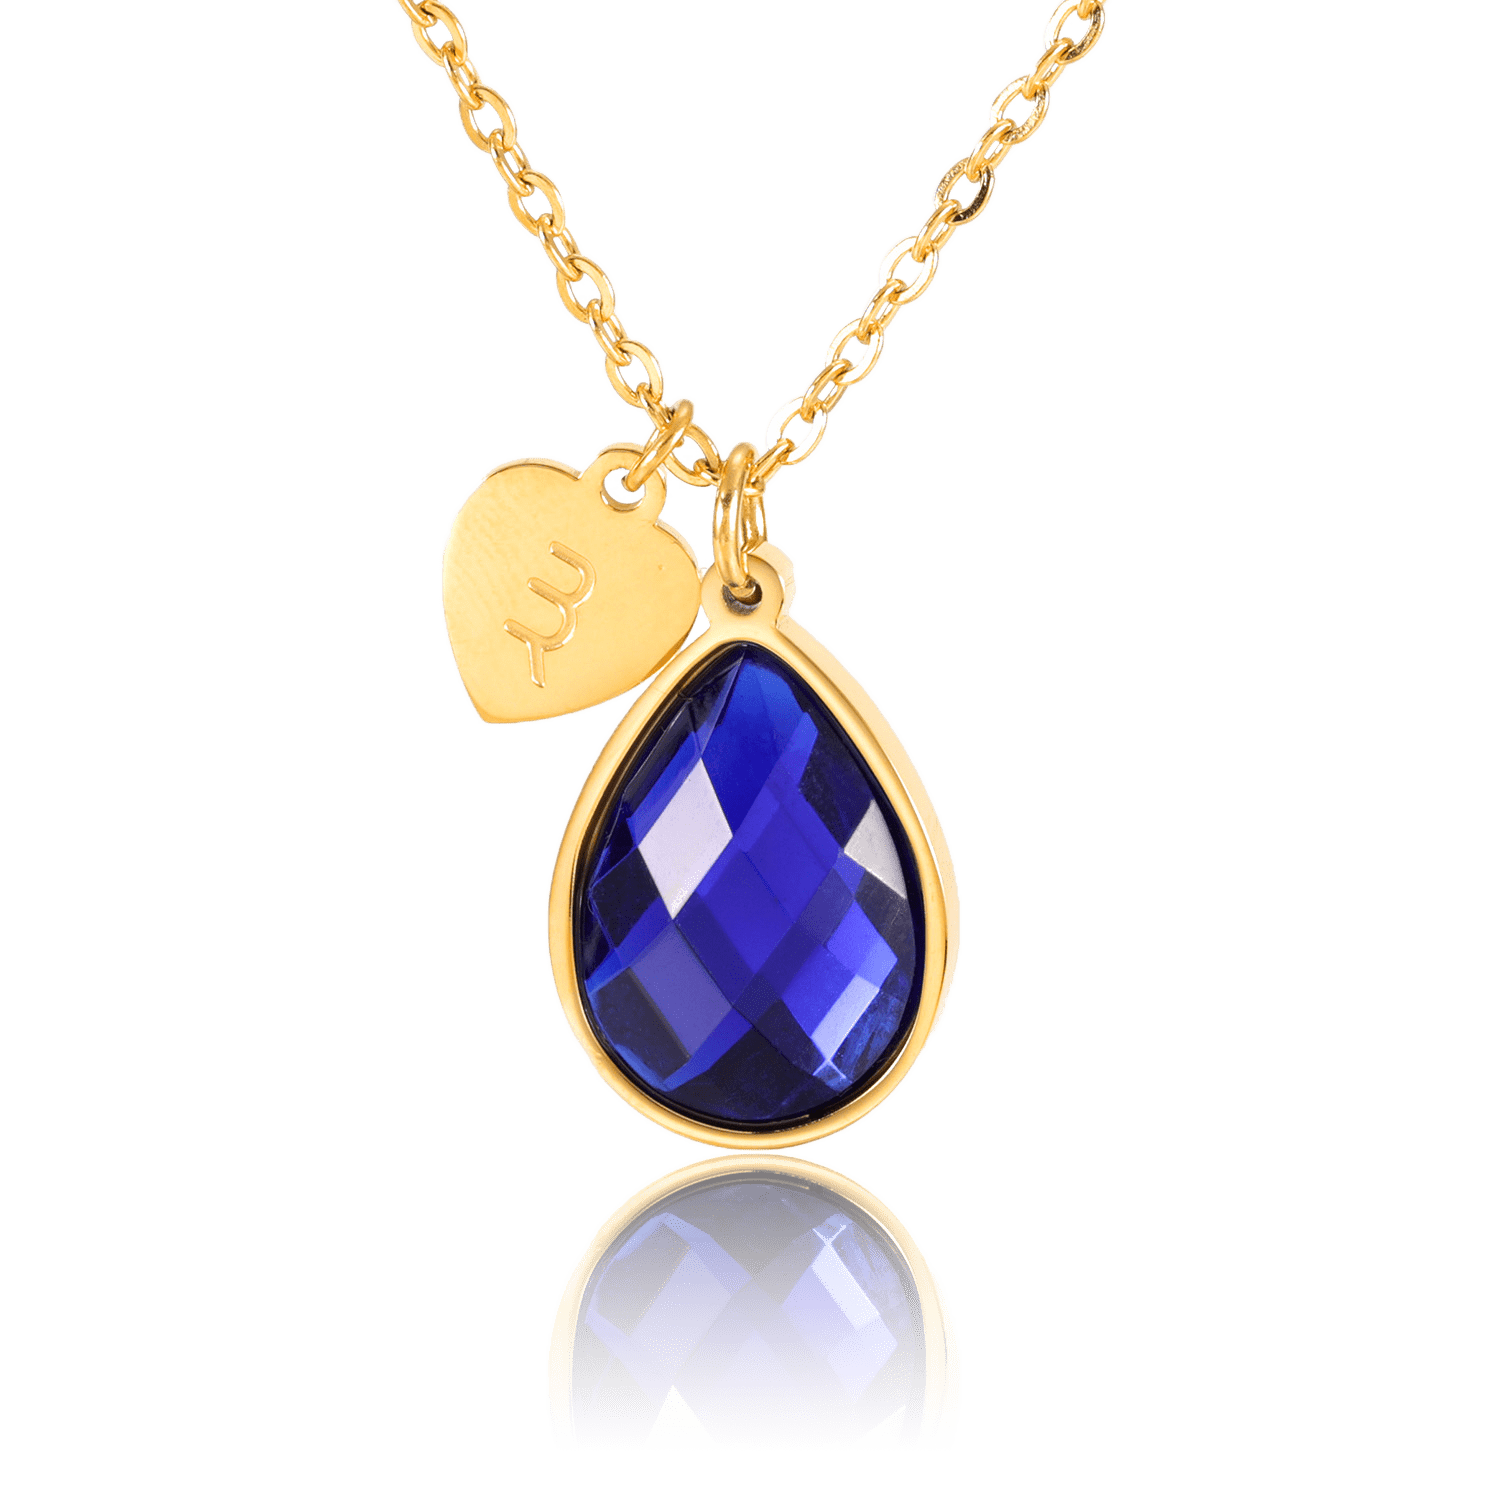 bianco rosso Necklaces Gold December Birthstone - Tanzanite cyprus greece jewelry gift free shipping europe worldwide